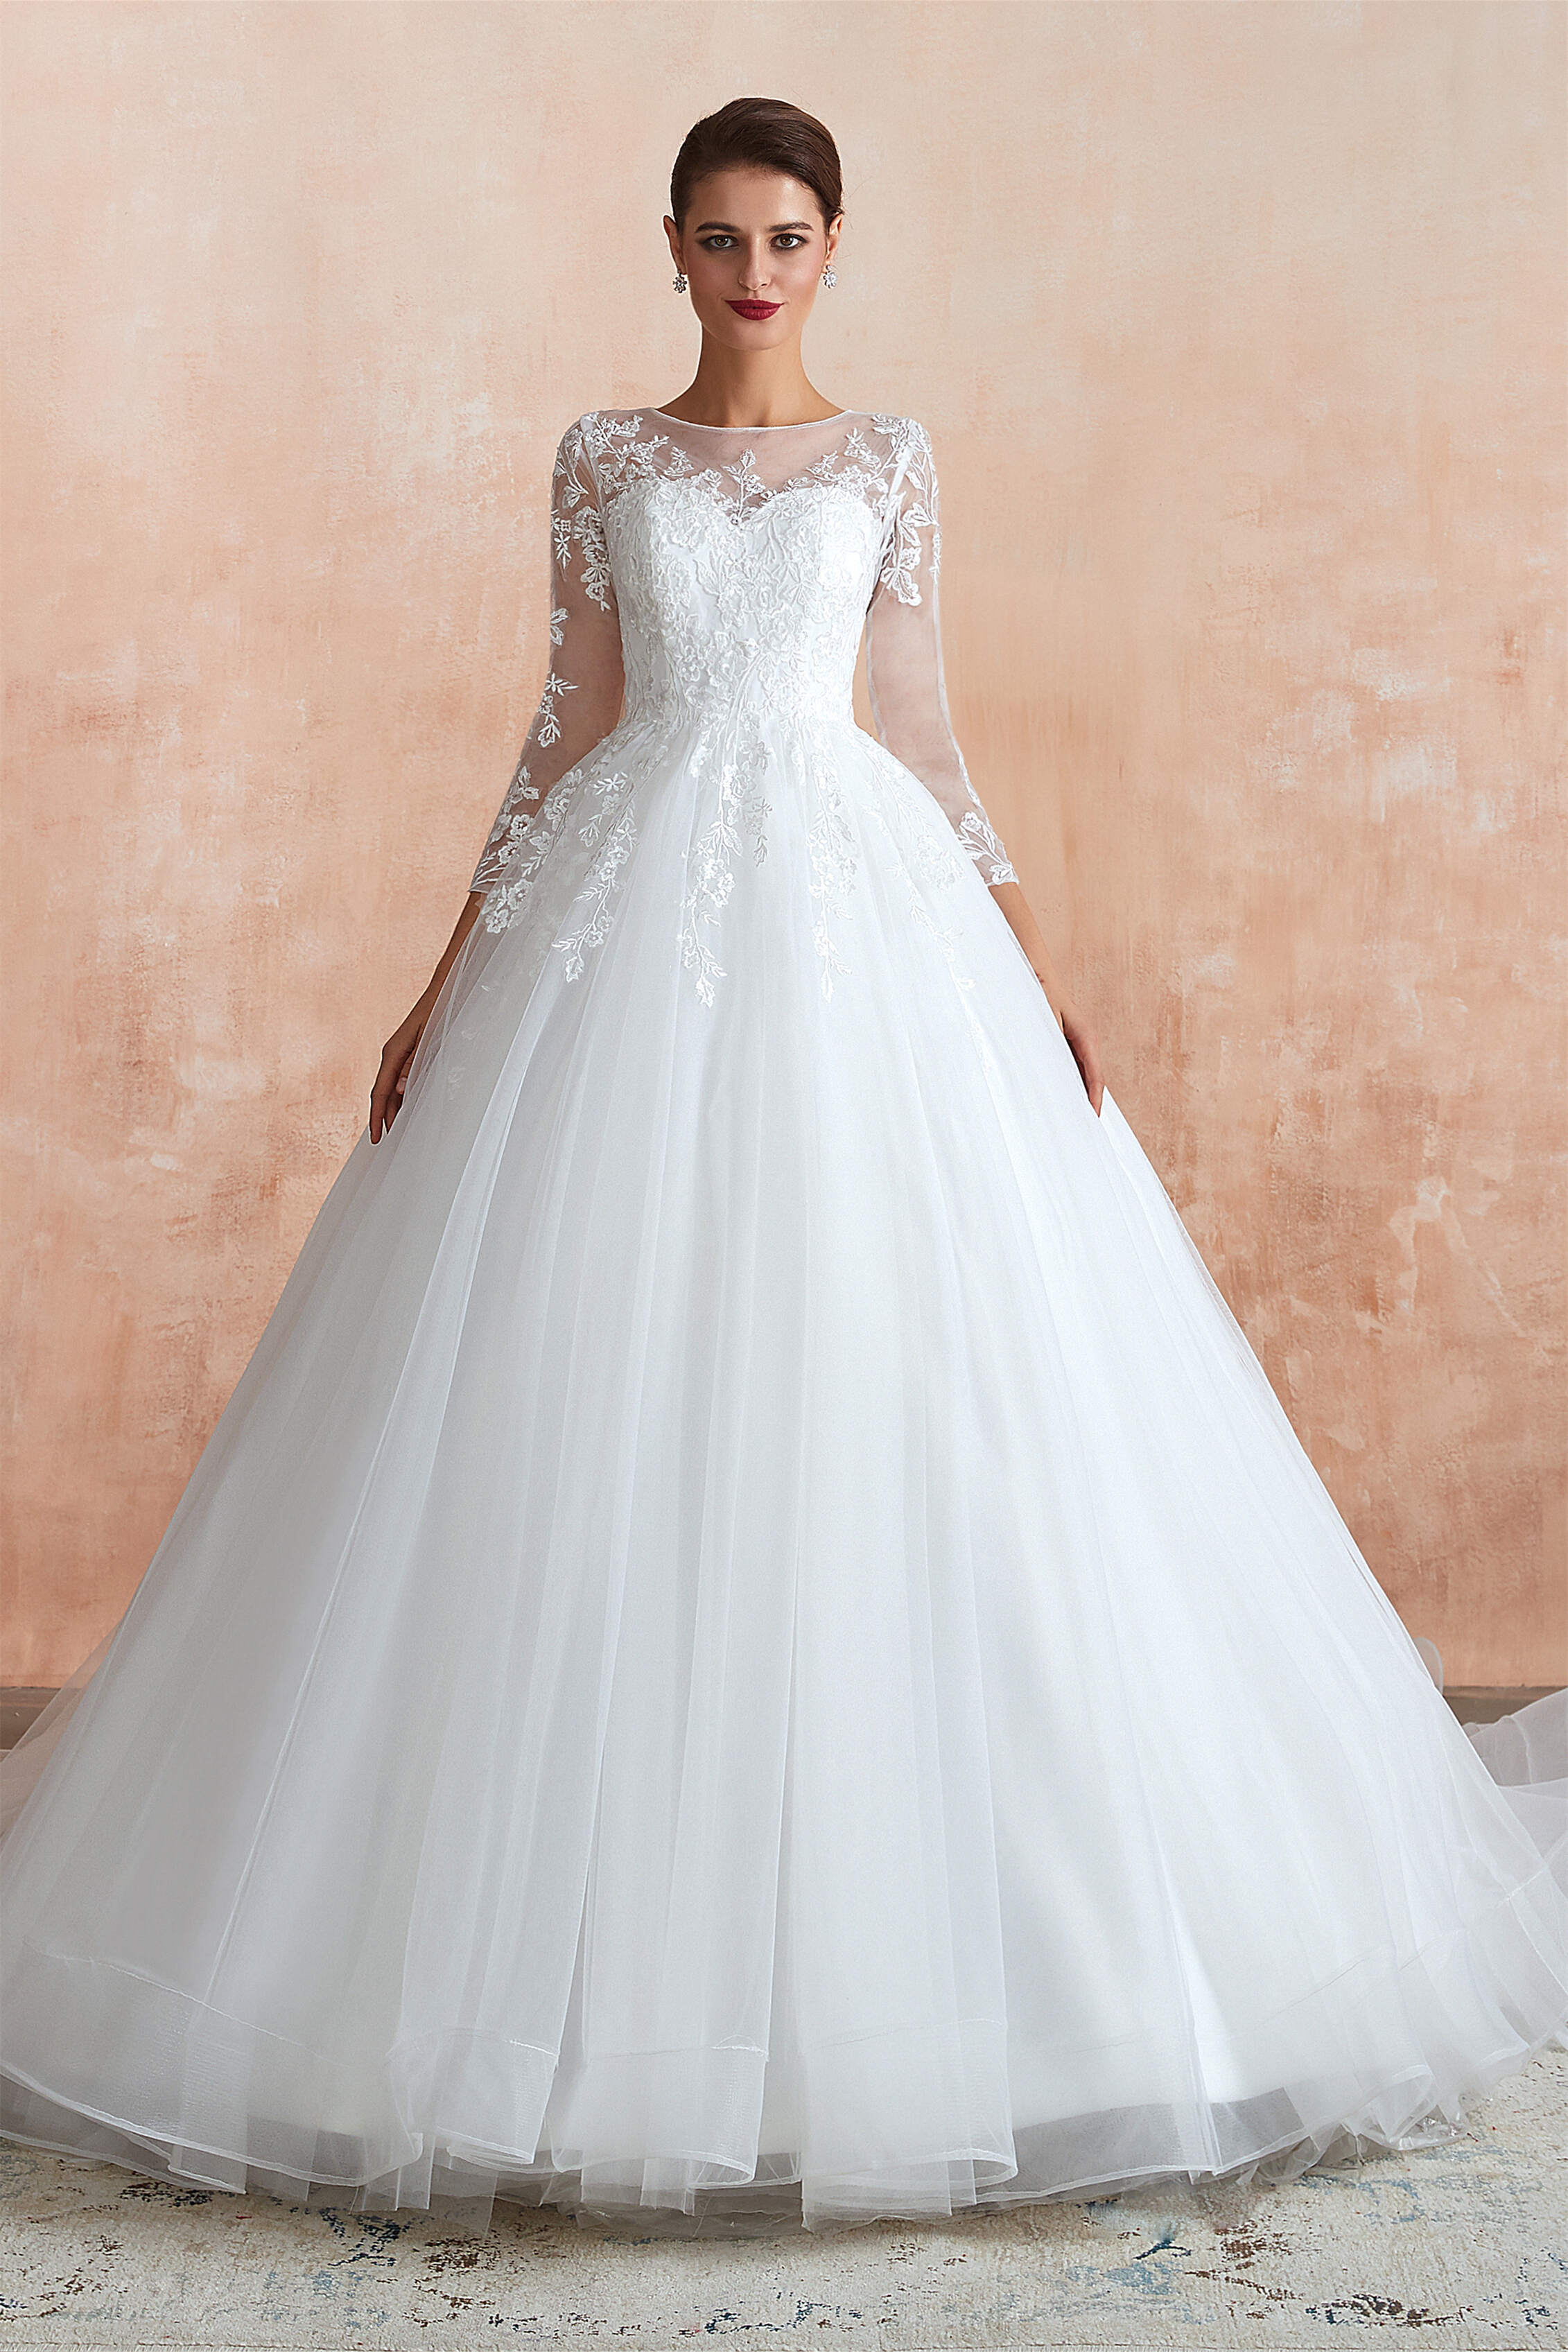 Wedding Dresses With Color, Lace Jewel White Tulle Wedding Dresses with 3/4 Sleeves